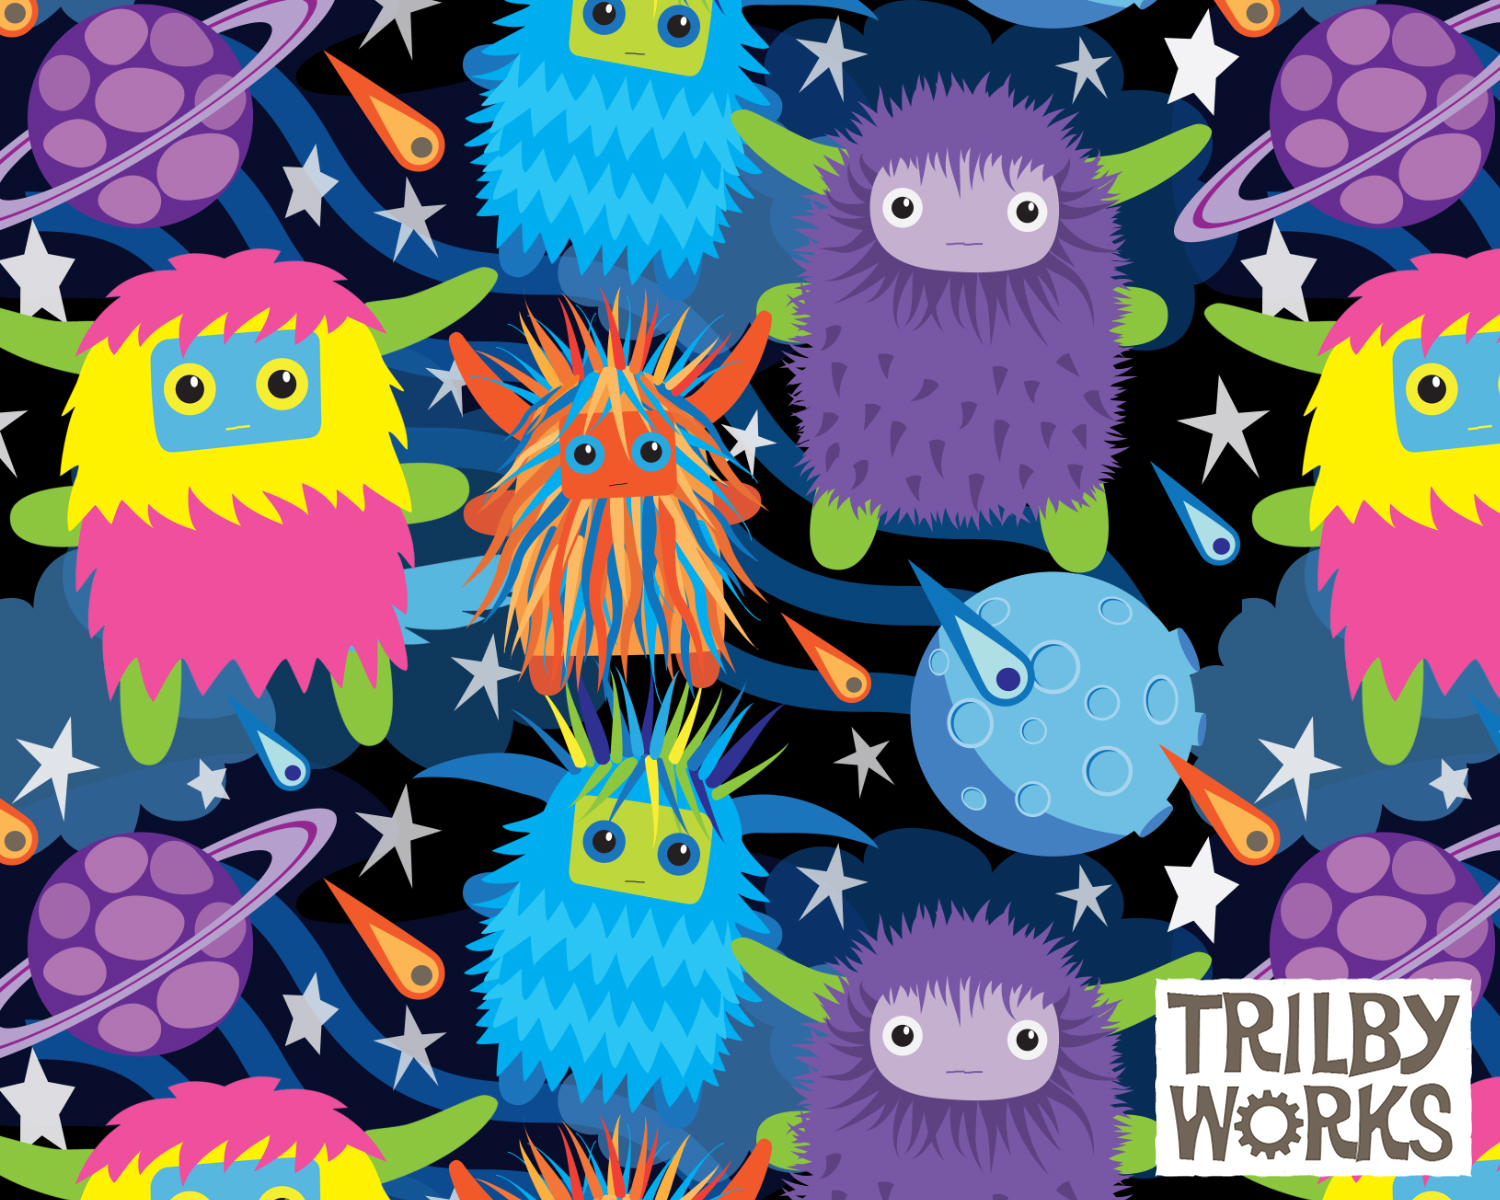 Monsters in Space by Trilby Works